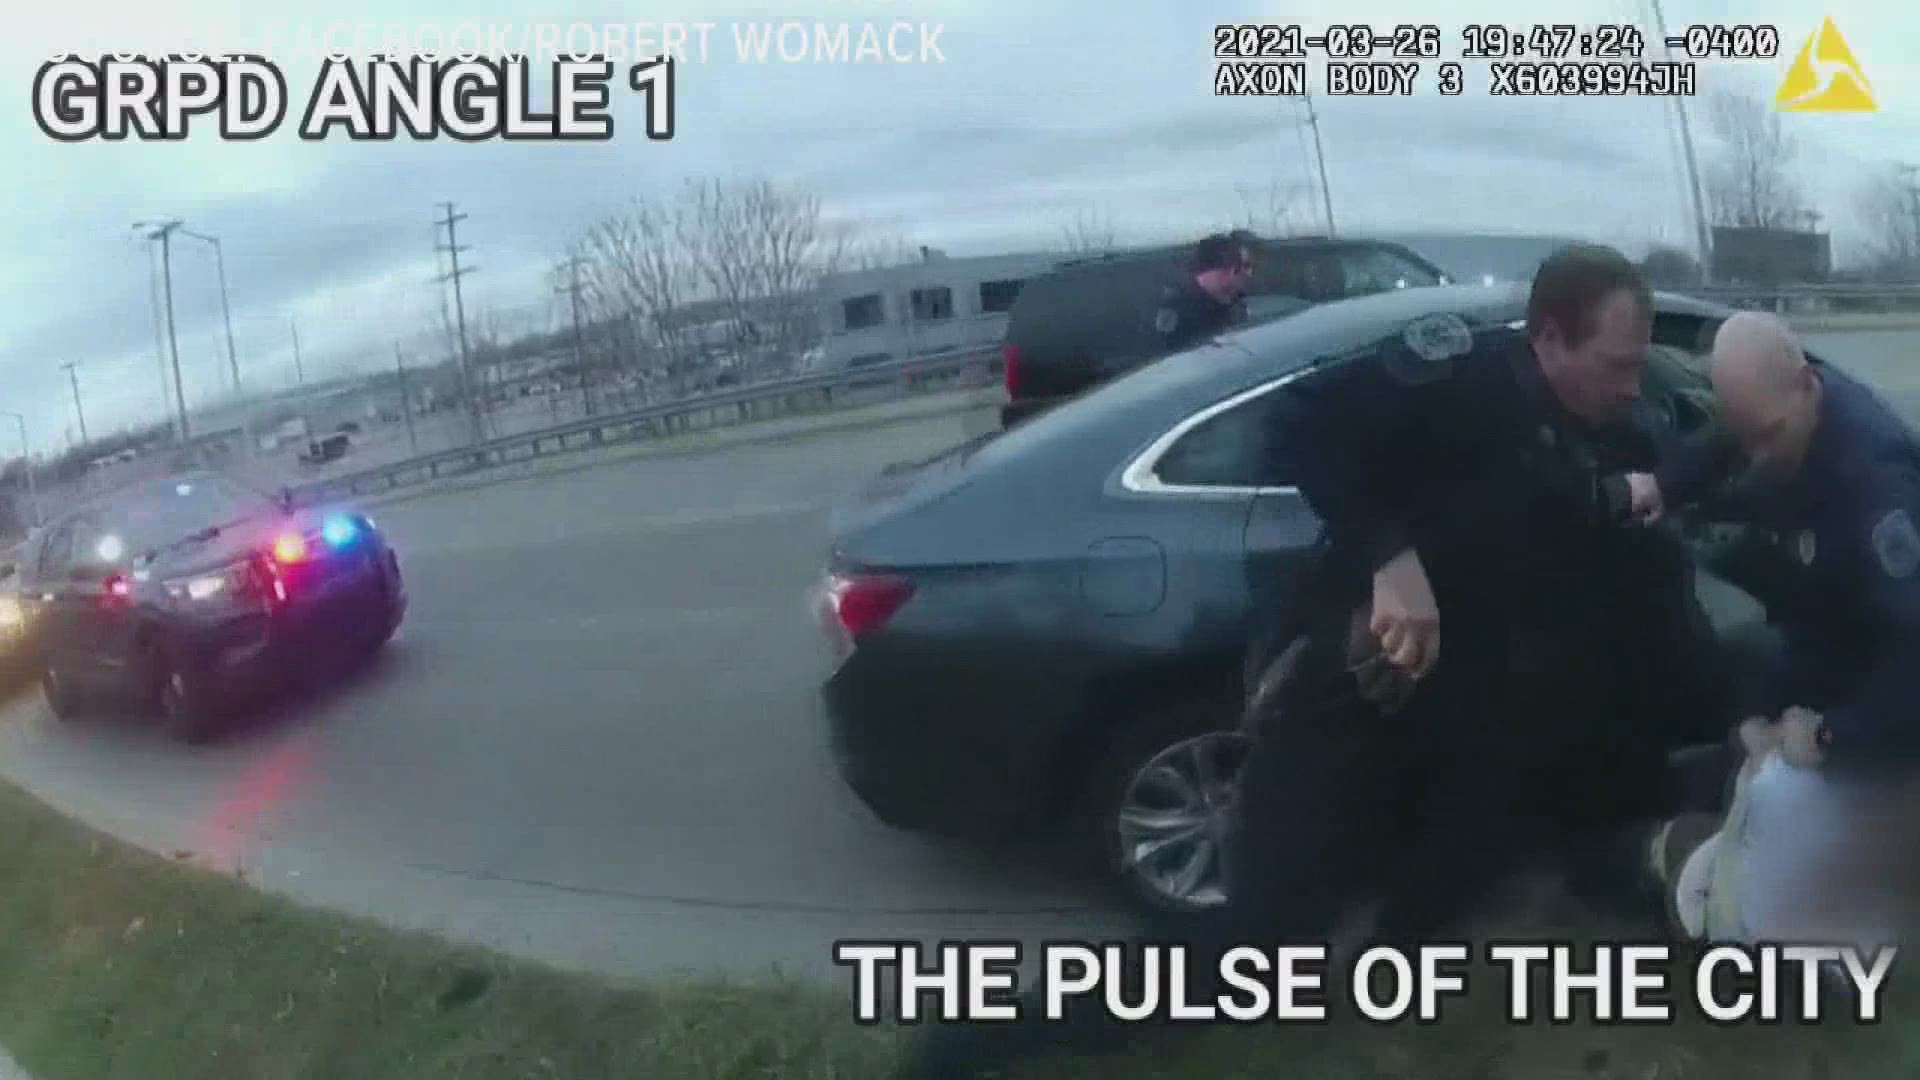 The order comes after a video was posted of a March 26 altercation between GRPD officers and three men during a traffic stop.